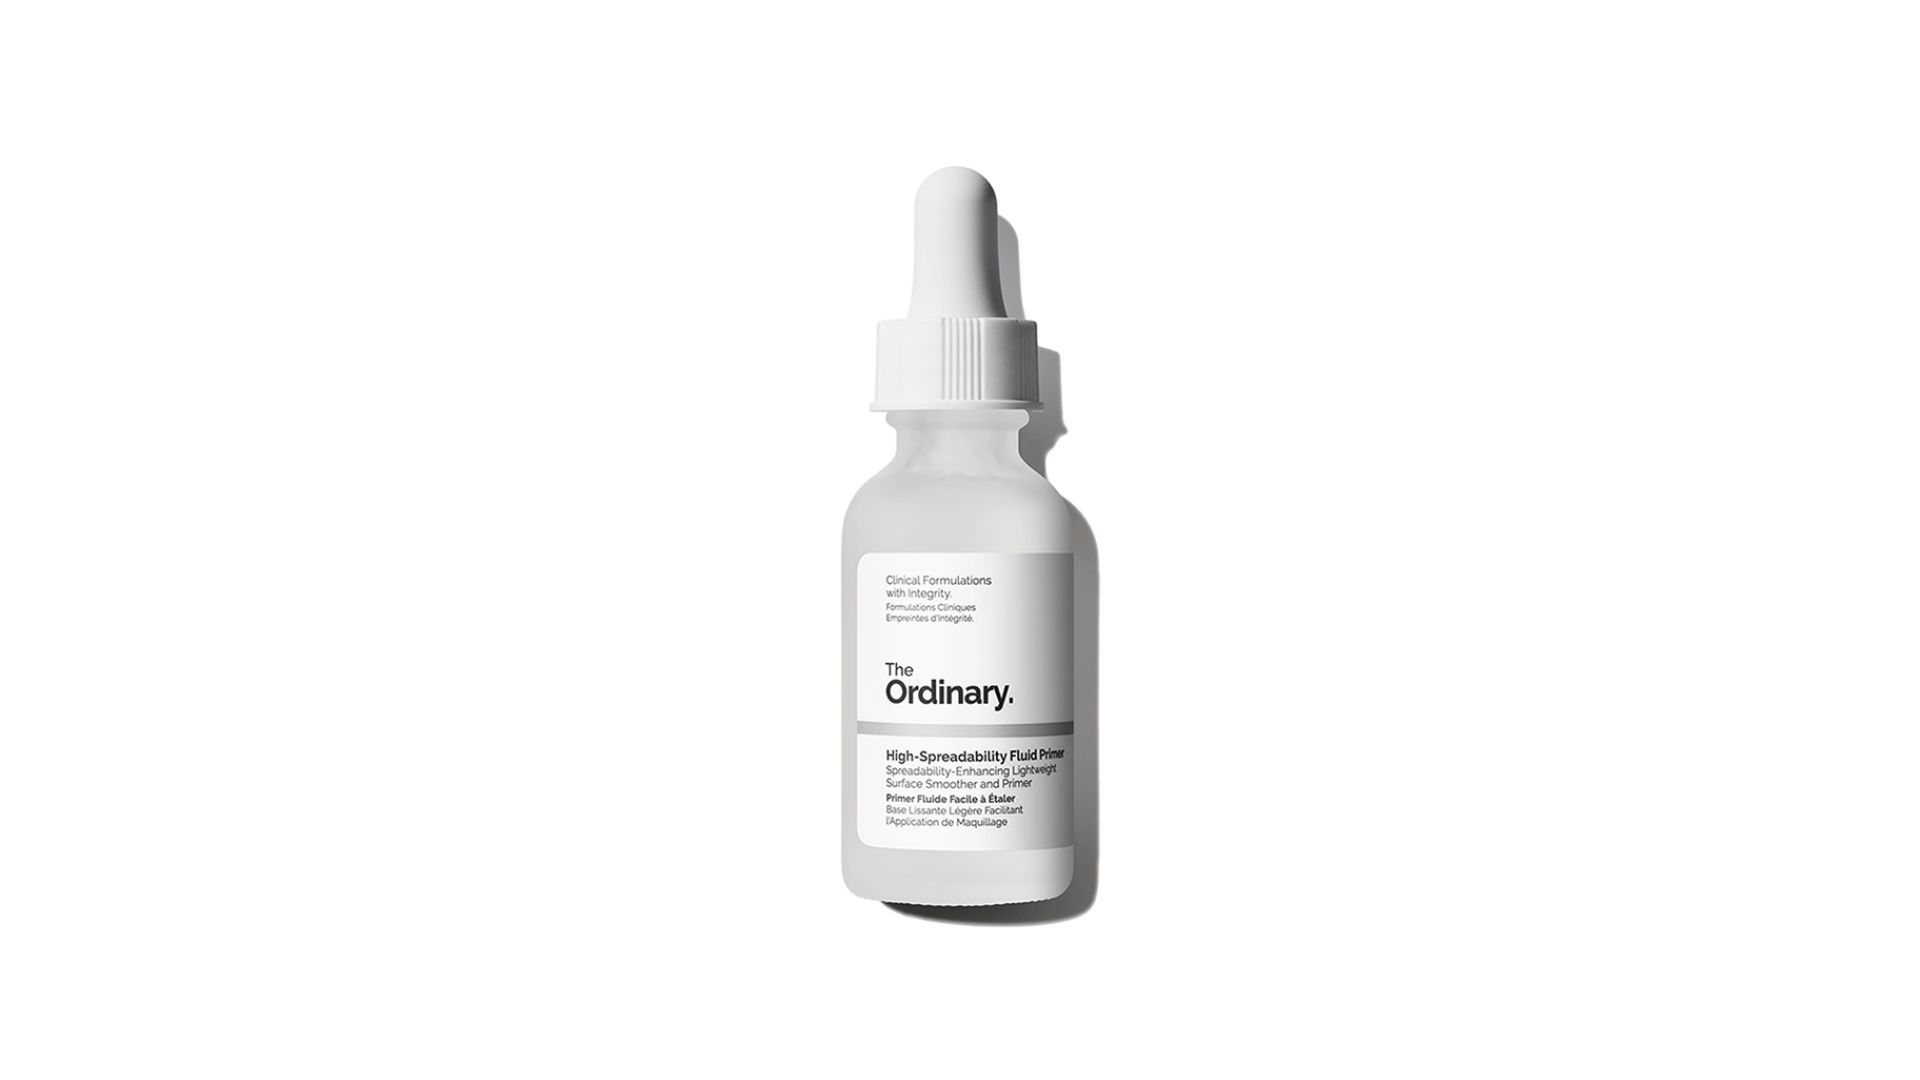 An image of an intentionally plain-looking product from the cosmetics brand "The Ordinary."